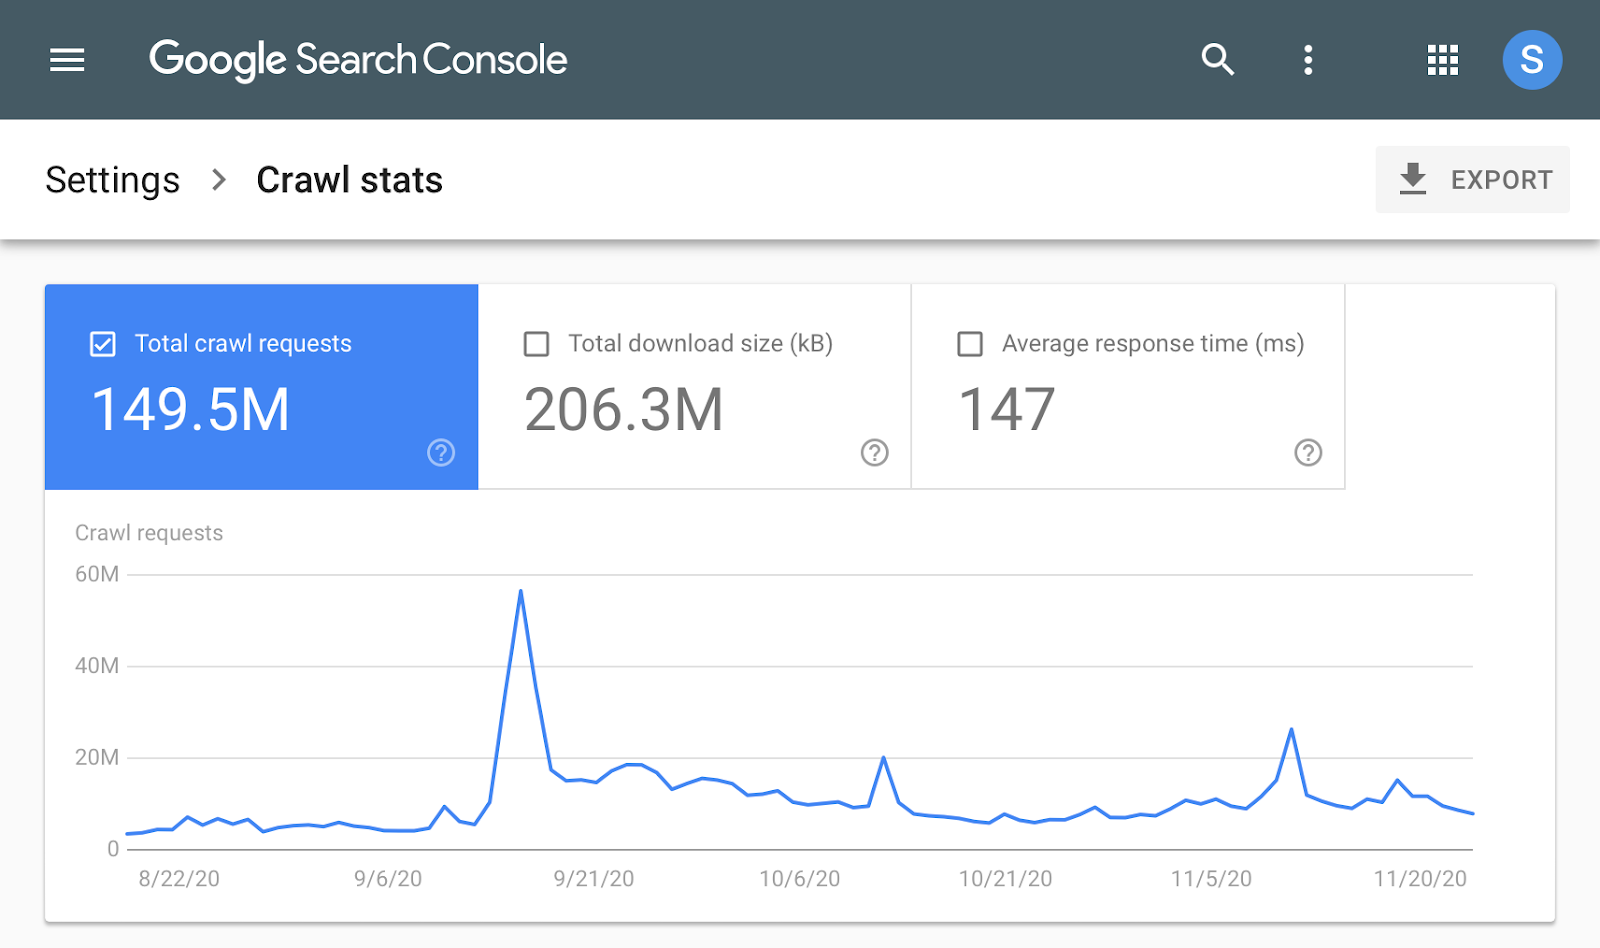 Google SearchConsole showing crawl statistics, specifically the total crawl requests graph